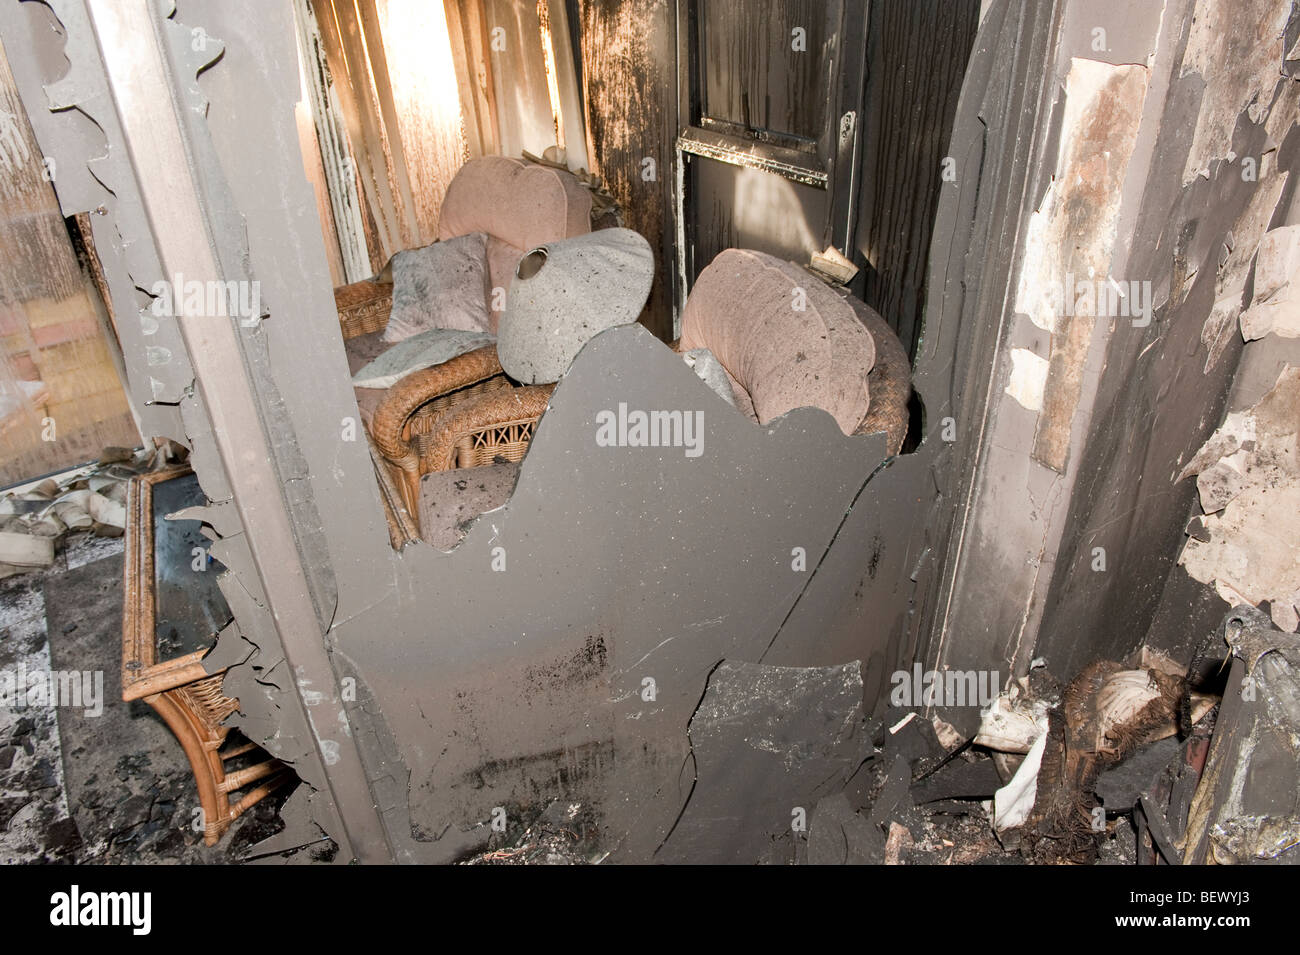 Severe house fire showing destroyed interior of house Stock Photo